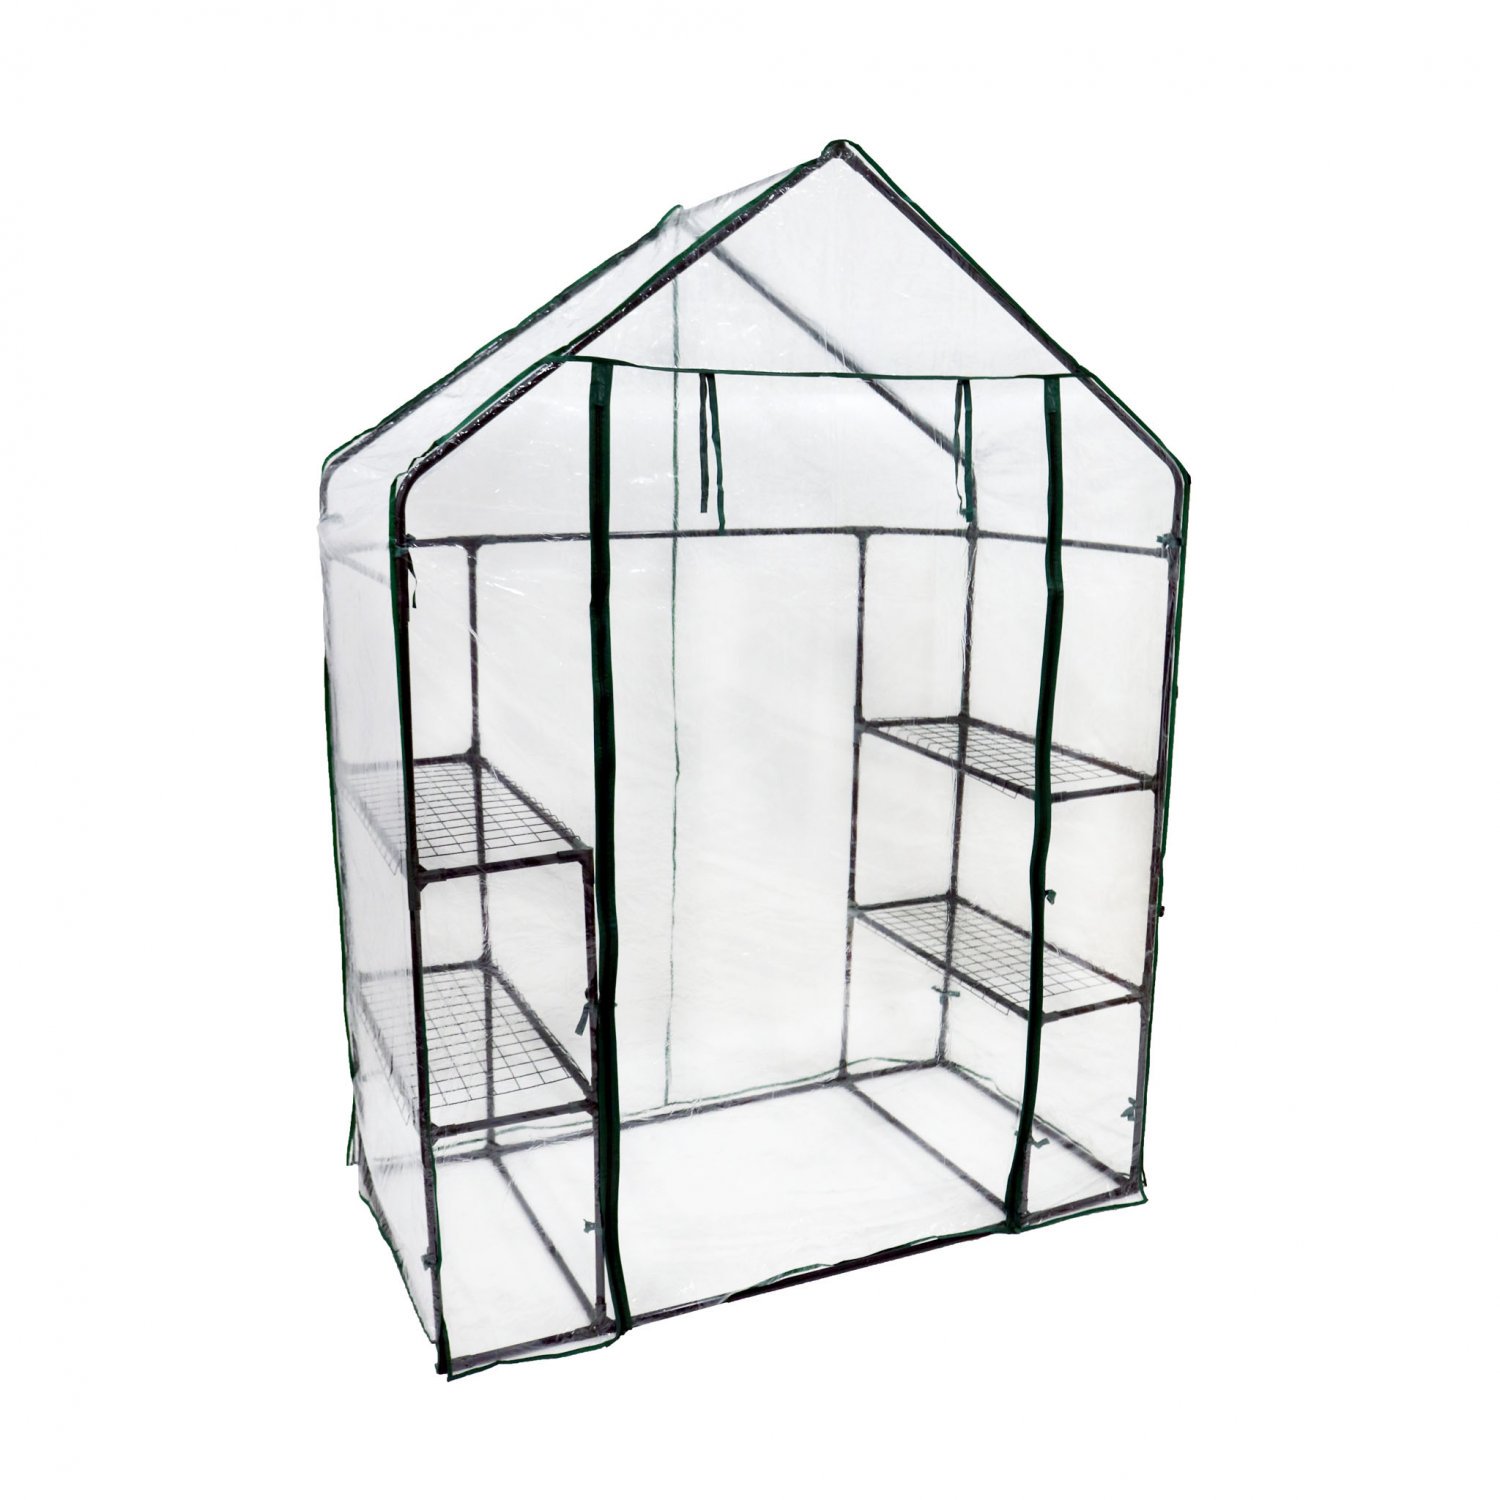 Replacement Spare PVC Cover for 3-Tier Walk-in Garden Greenhouse - Click Image to Close